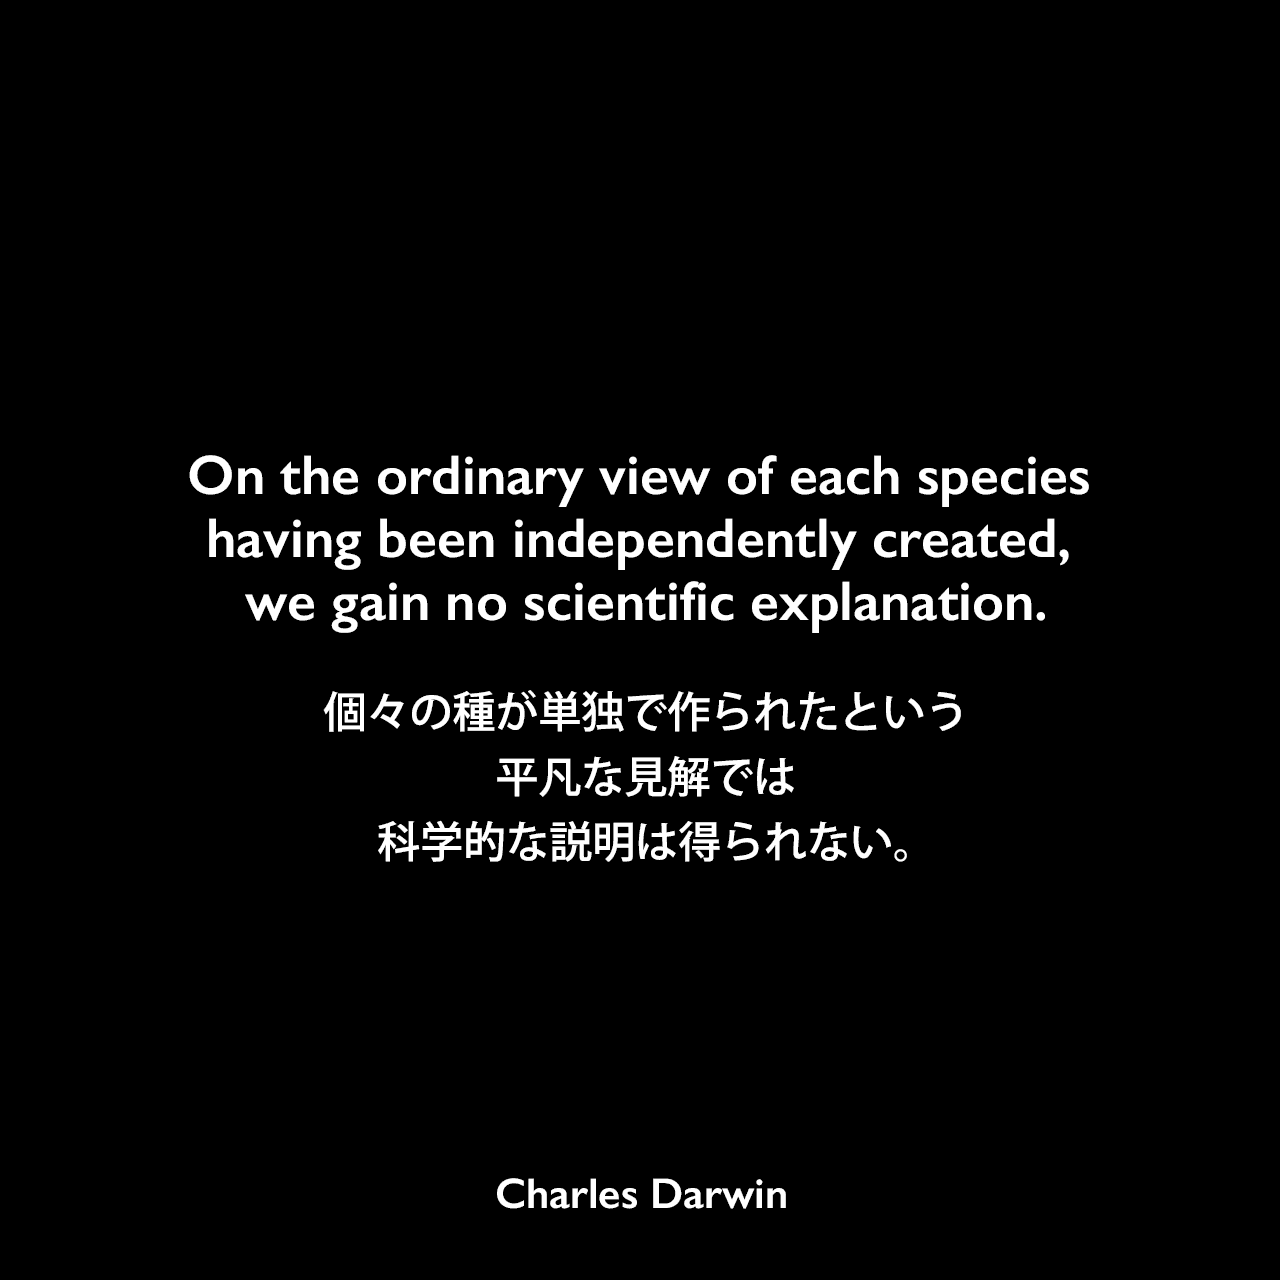 On the ordinary view of each species having been independently created, we gain no scientific explanation.個々の種が単独で作られたという平凡な見解では、科学的な説明は得られない。Charles Darwin